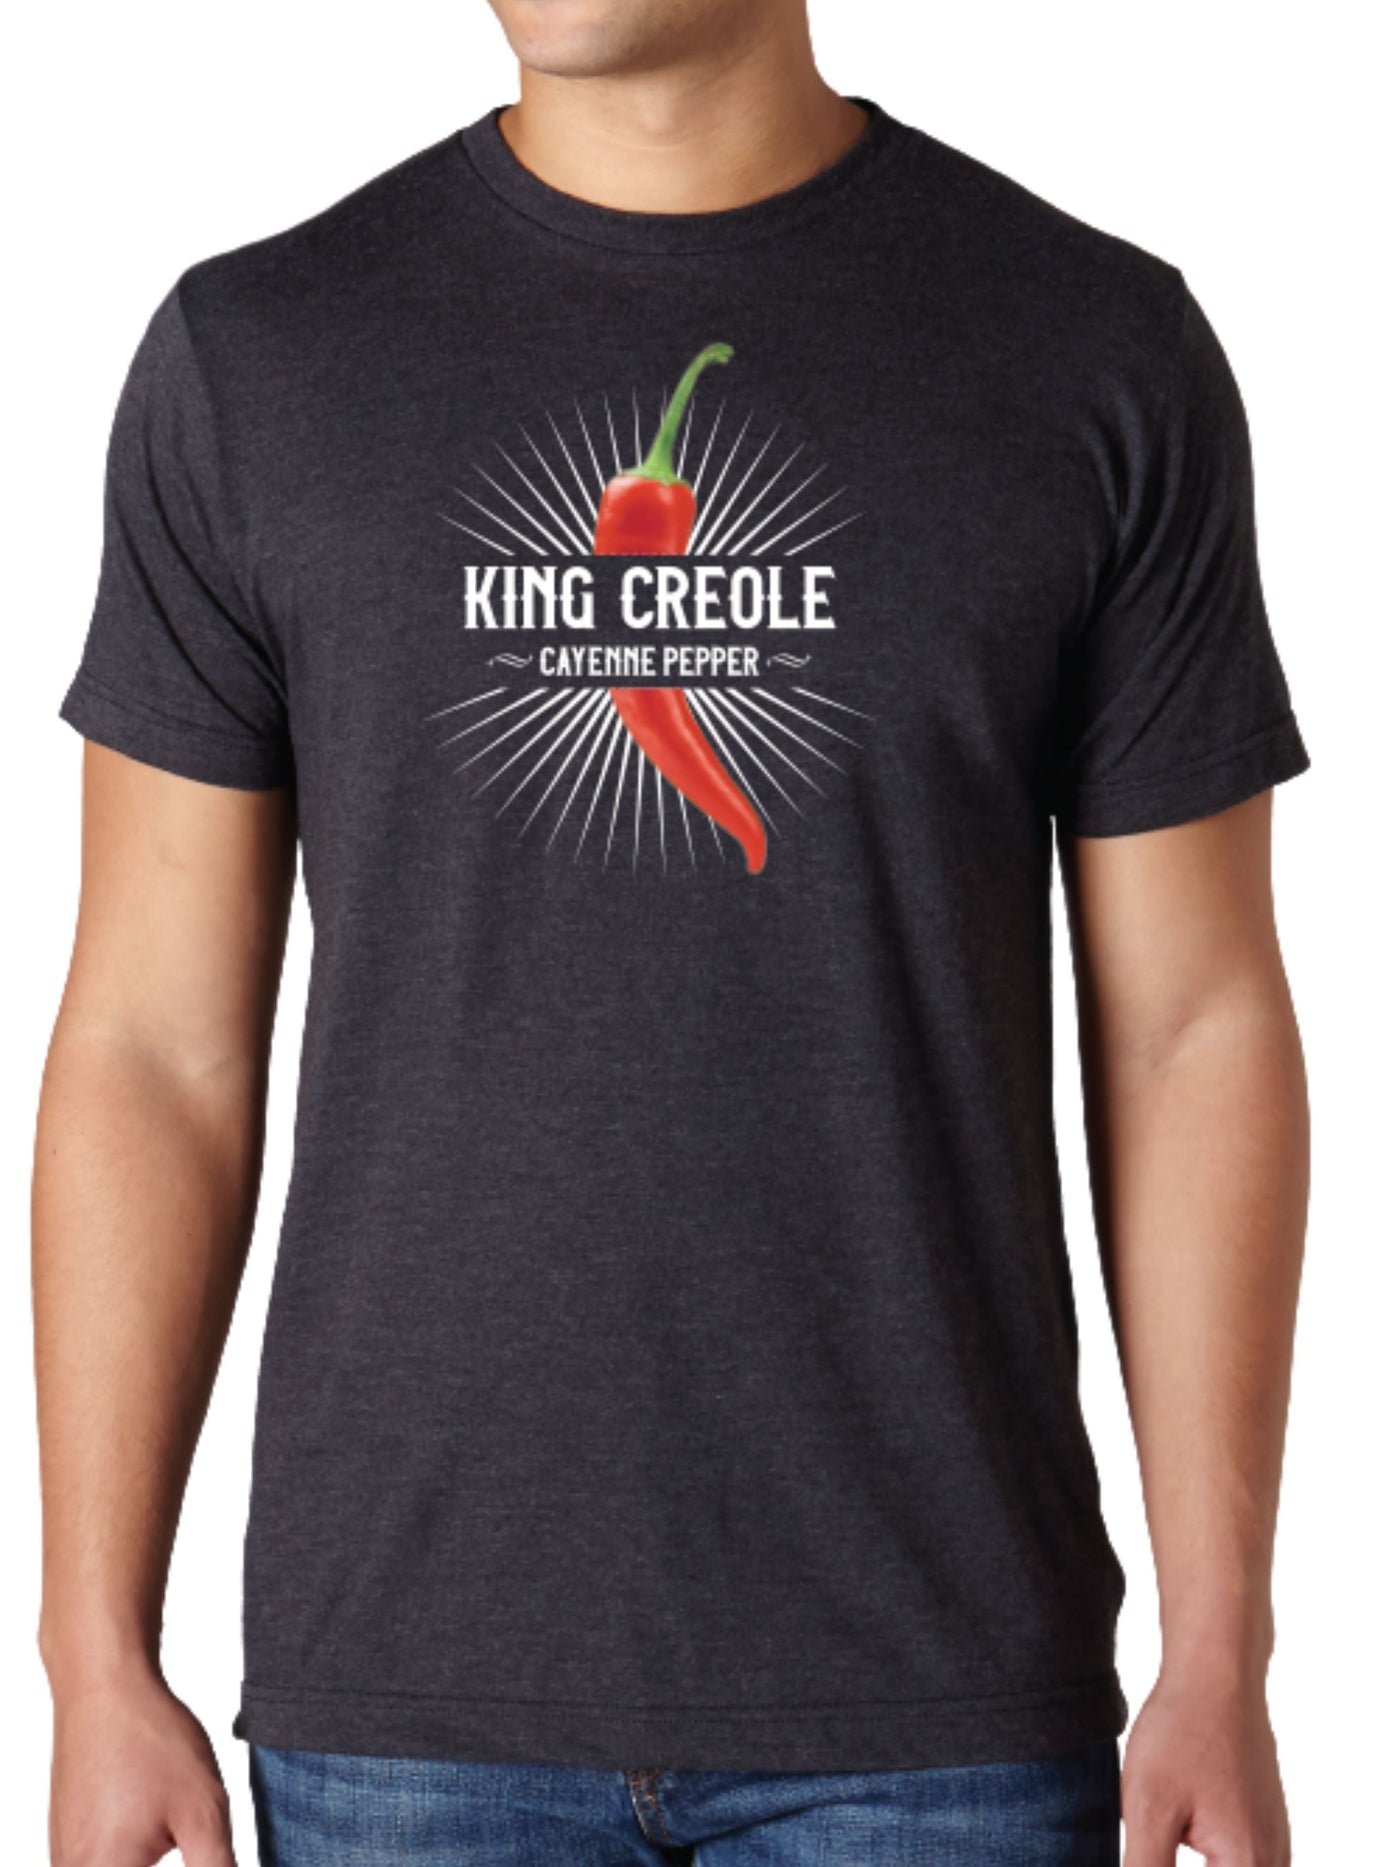 King Creole Cayenne Pepper T-Shirt from Louisiana Pepper Exchange